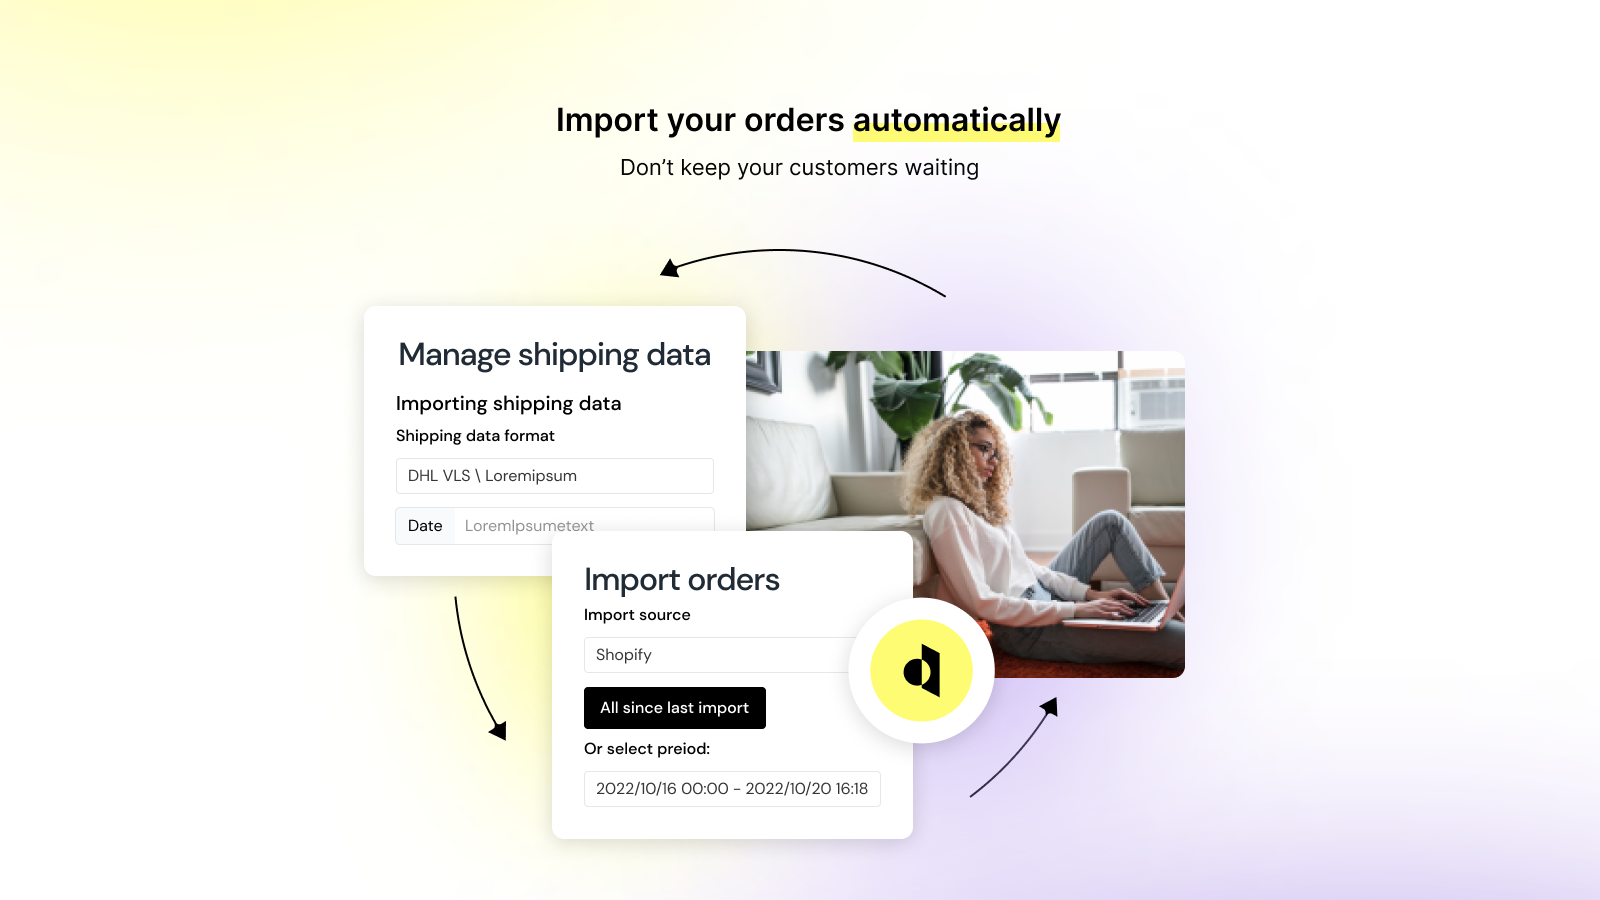 Automatic order import to your accounting system